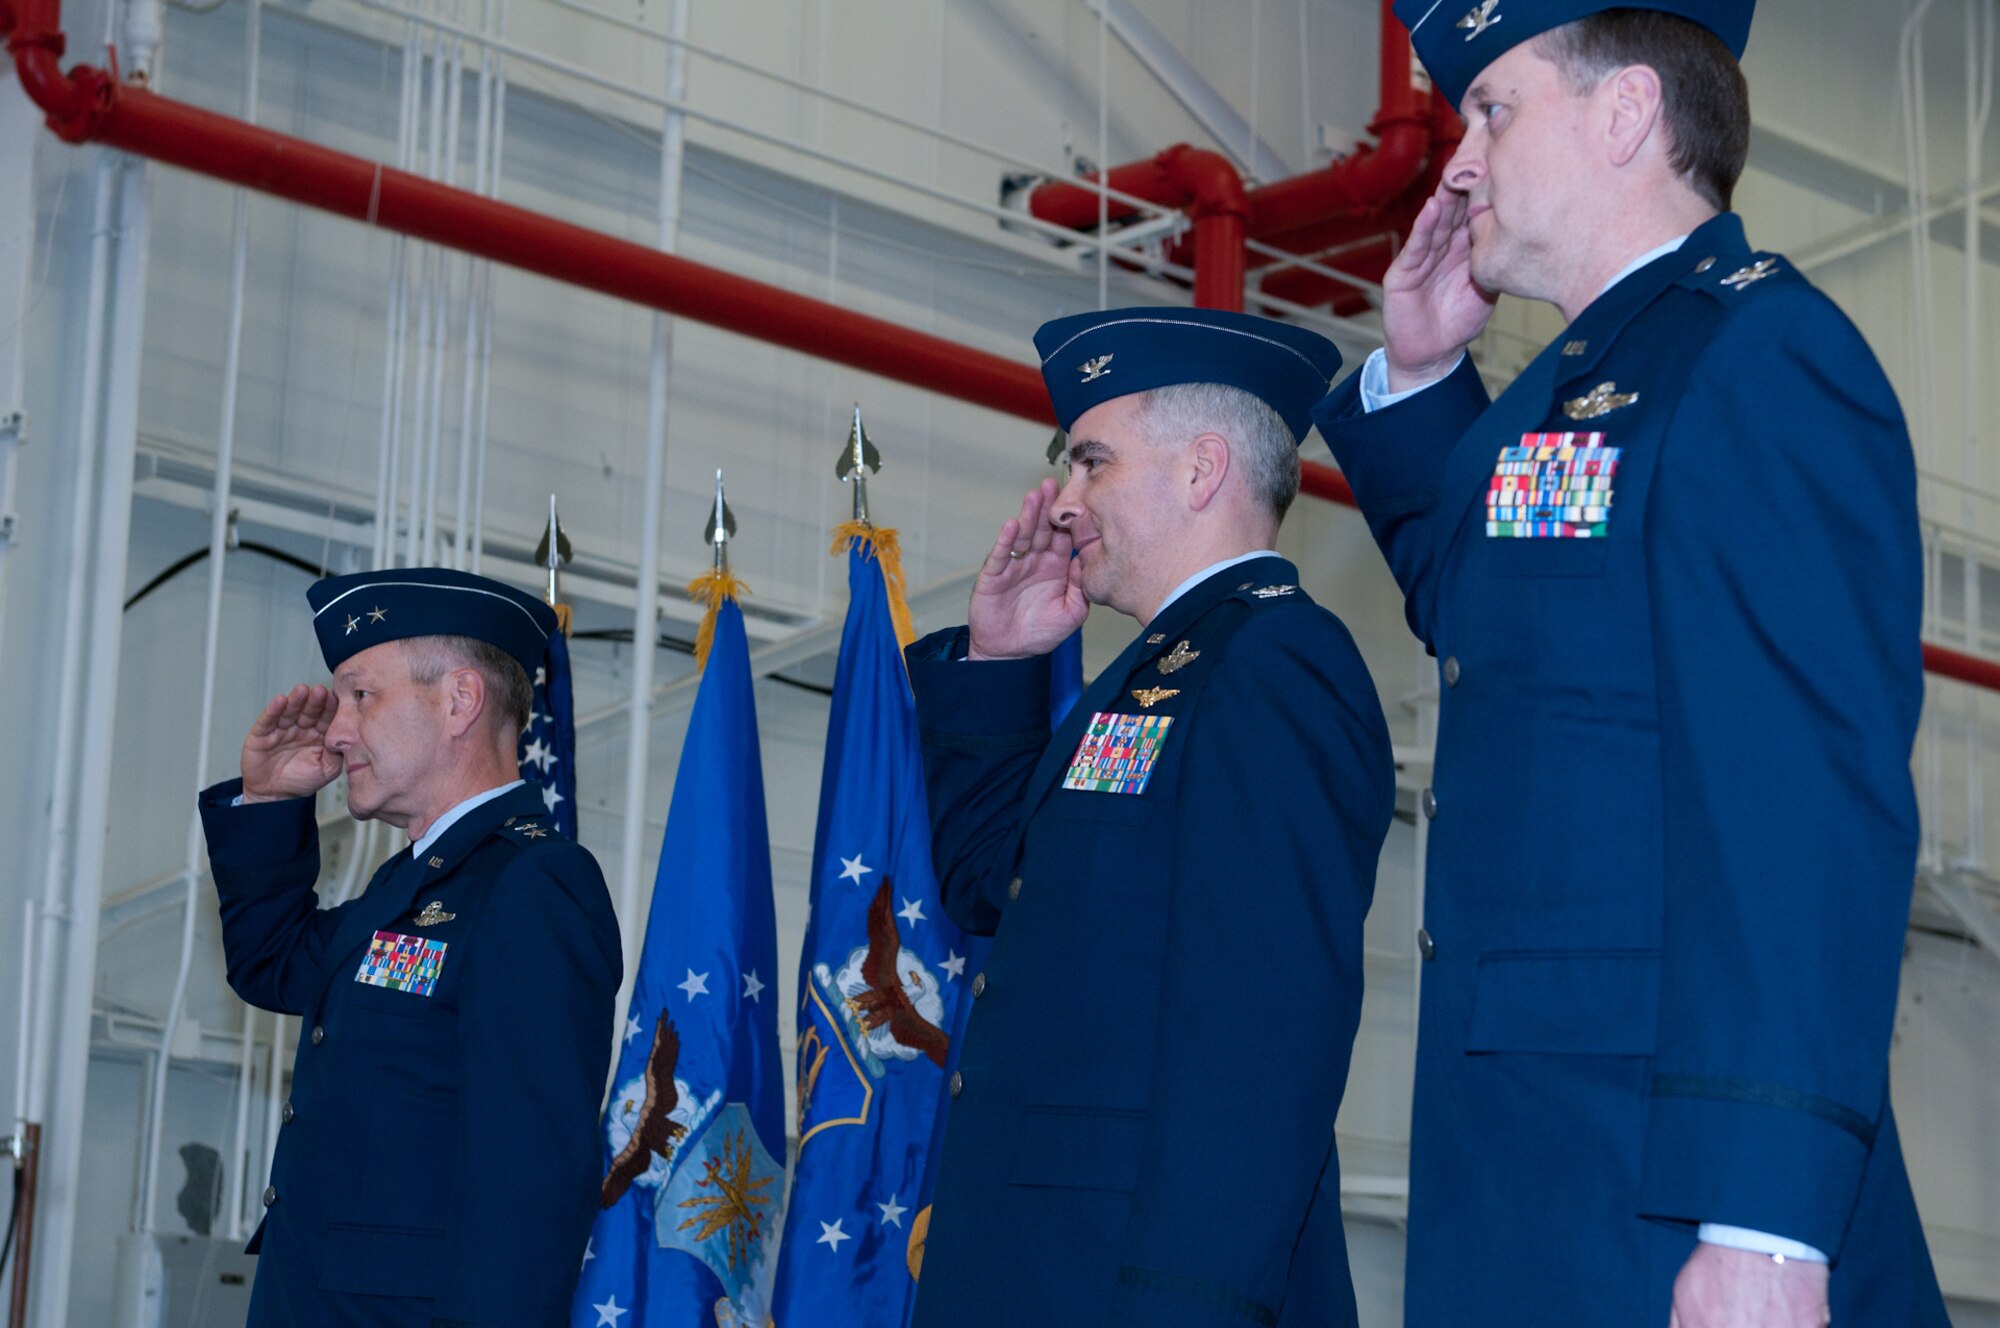 JOINT BASE ANDREWS, Md. -- Maj. Gen. Eric W. Crabtree (far left), 4th Air Force commander, joins Col. James M. Allman (center) and Col. Russell A. Muncy (far right), in a change of command ceremony here Mar. 5. Colonel Muncy took command of the 459th Air Refueling Wing from Colonel Allman, who retired from the Air Force after 26 years of military service. (U.S. Air Force photo/Staff Sgt. Sophia Piellusch)